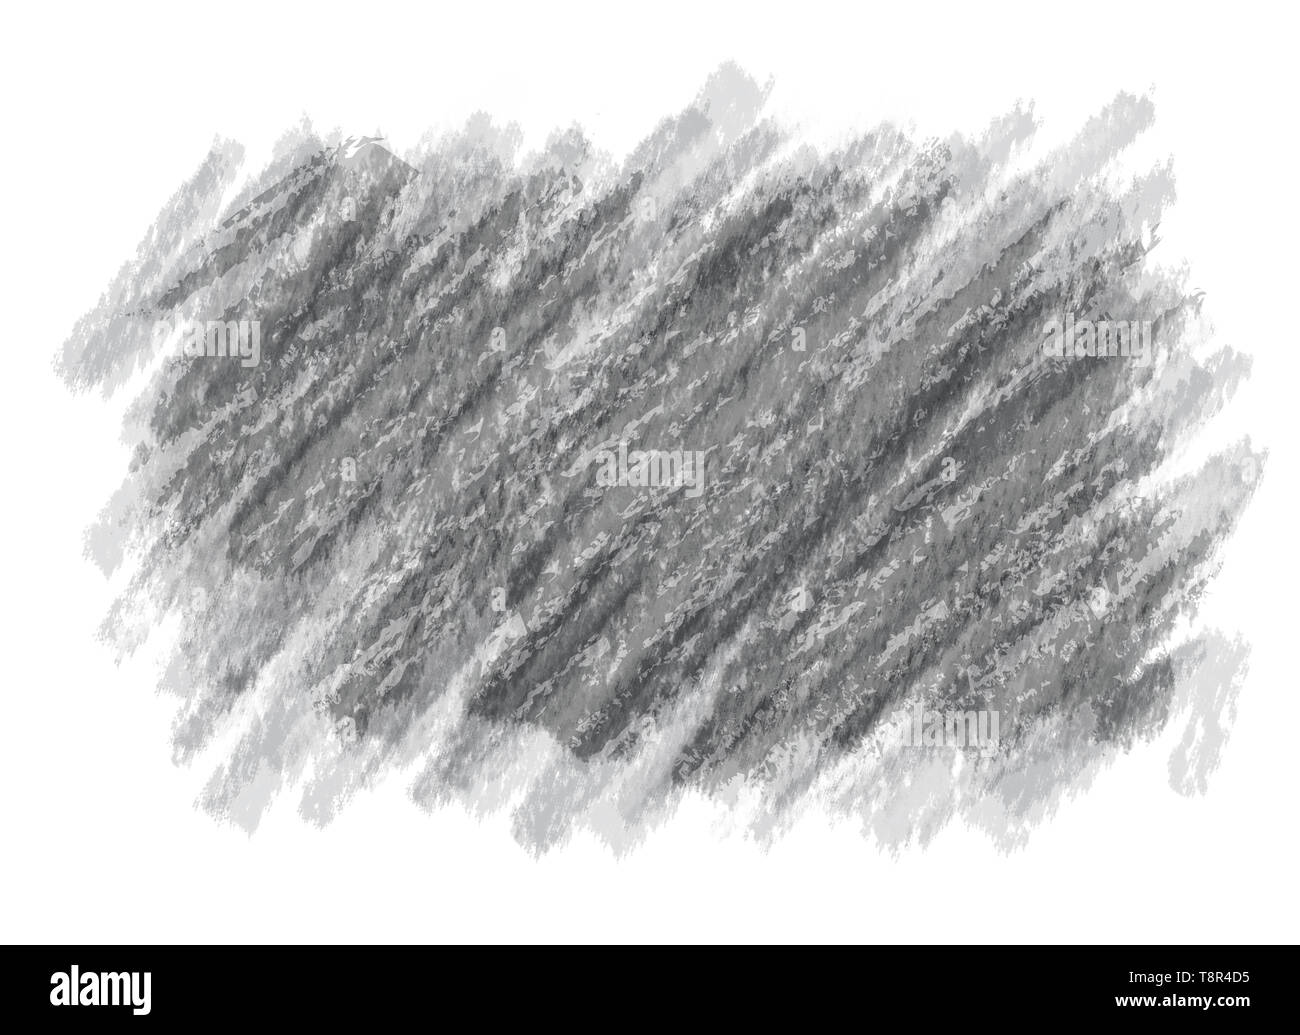 Free Images  simple background black and white art illustration  drawings sketch sketching minimal minimalist minimalism minimalistic  backgrounds texture pencil drawing black white illustrations line  eyelash plant monochrome 